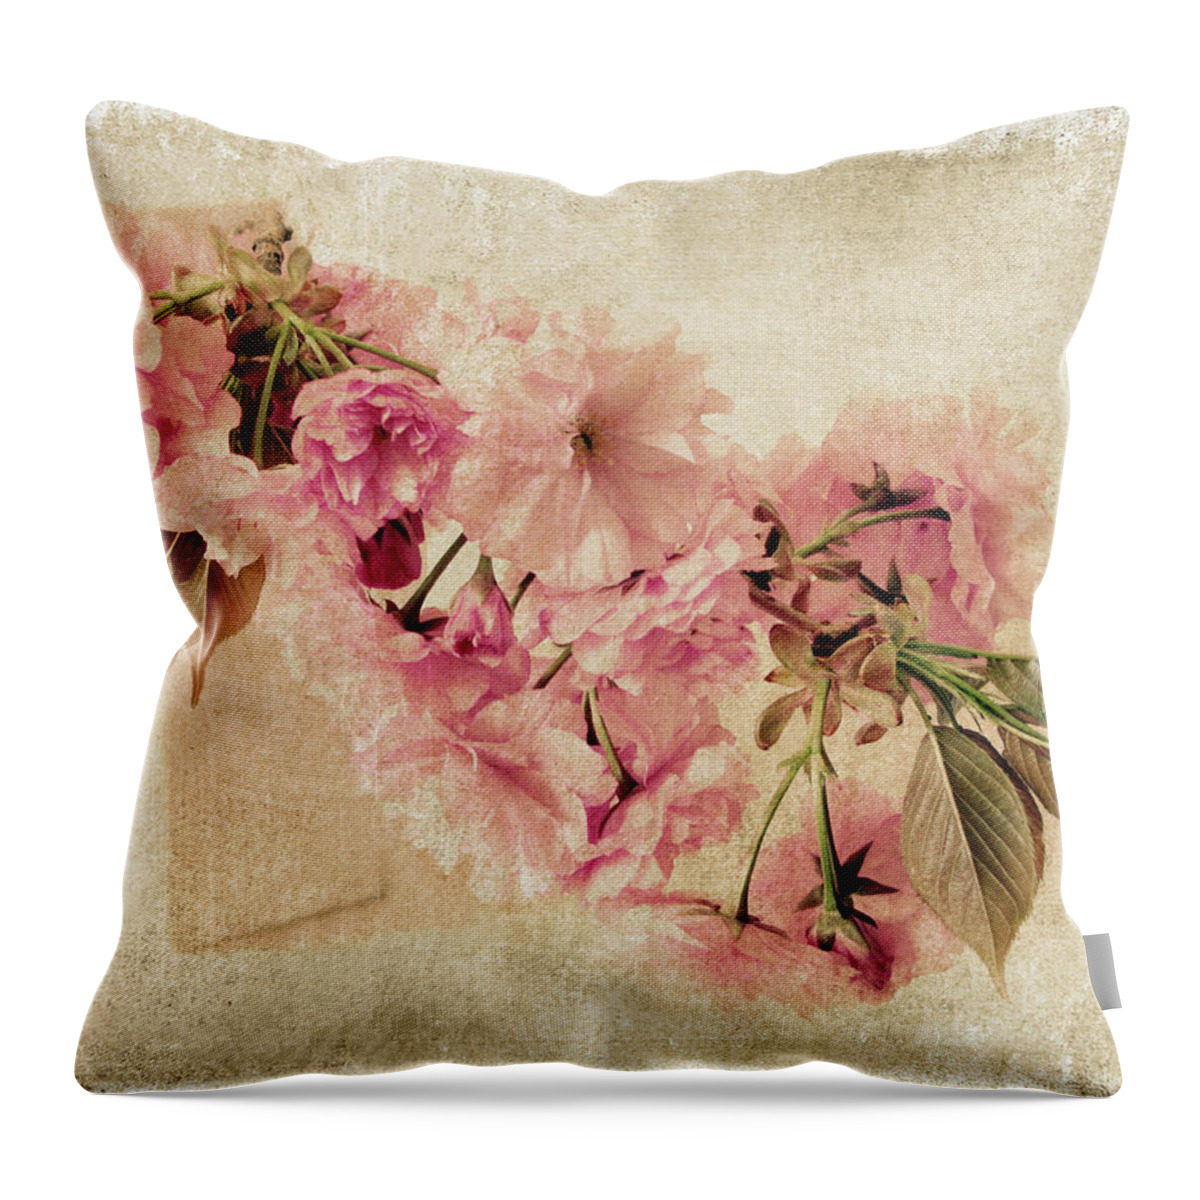 Floral Throw Pillow featuring the photograph Vintage Blossom #2 by Jessica Jenney